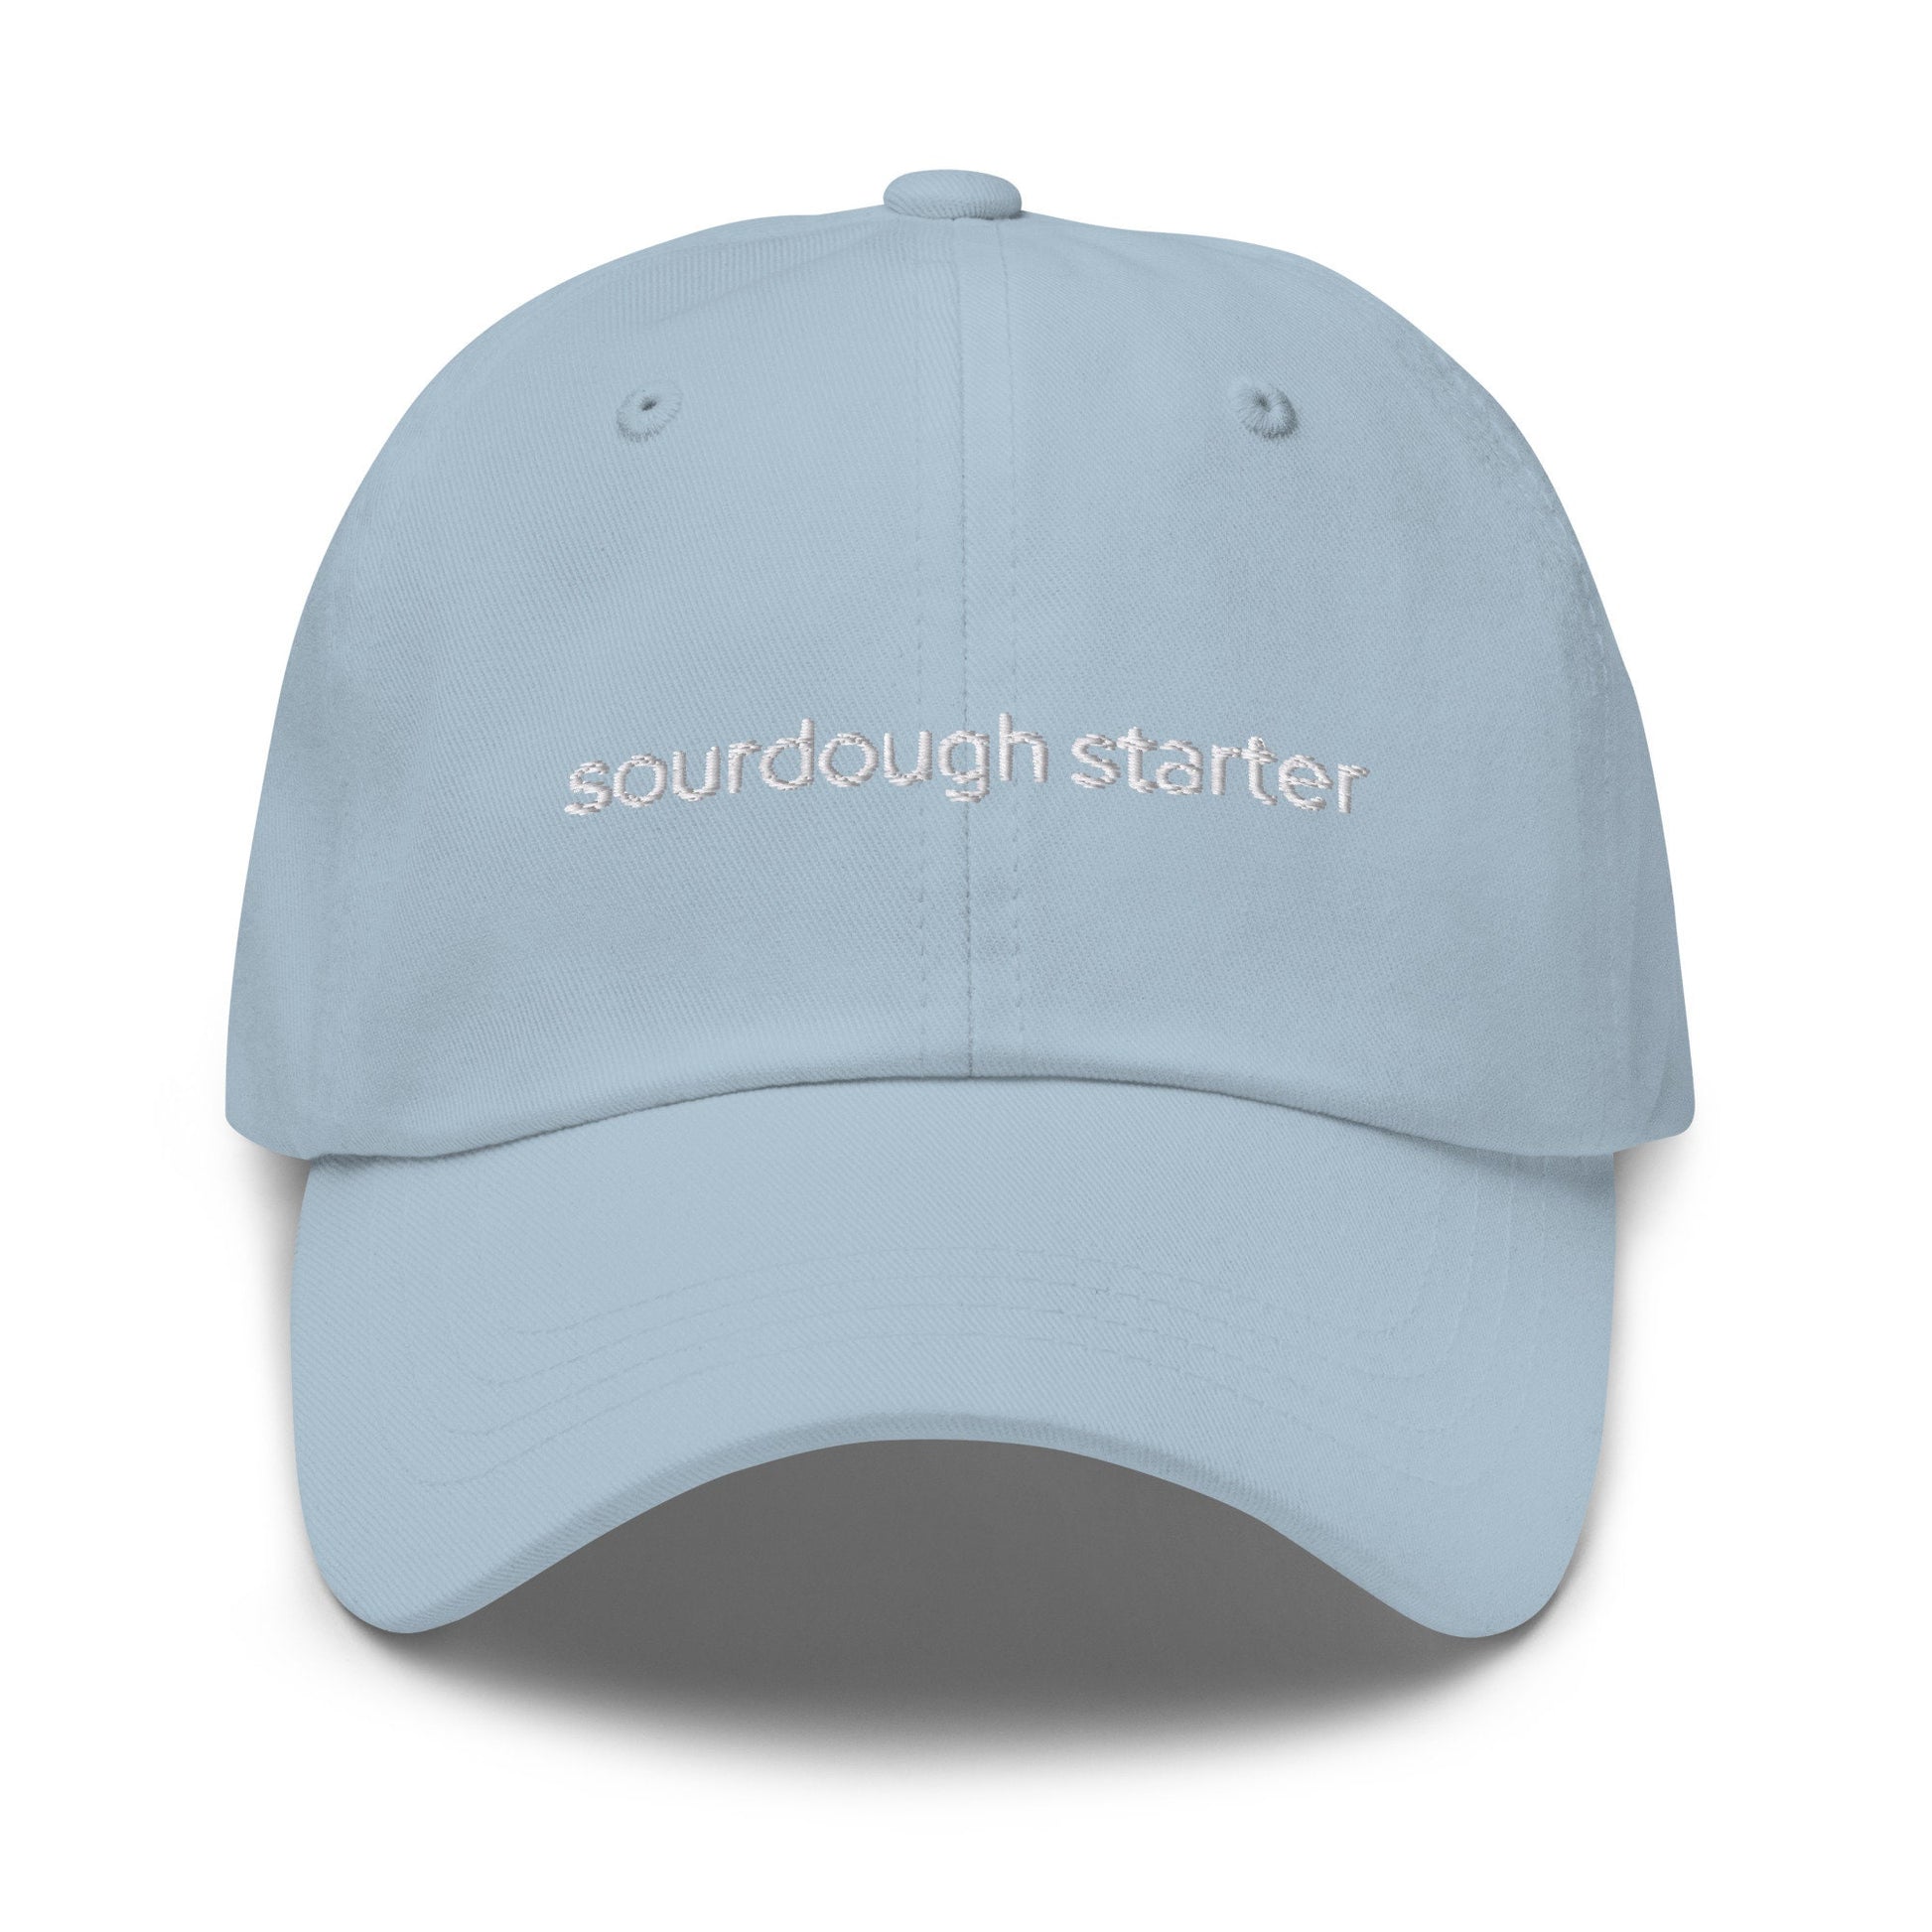 Sourdough Starter Hat - Gift for Bread Lovers and Bakers - Embroidered Cotton Hat - Multiple Colors